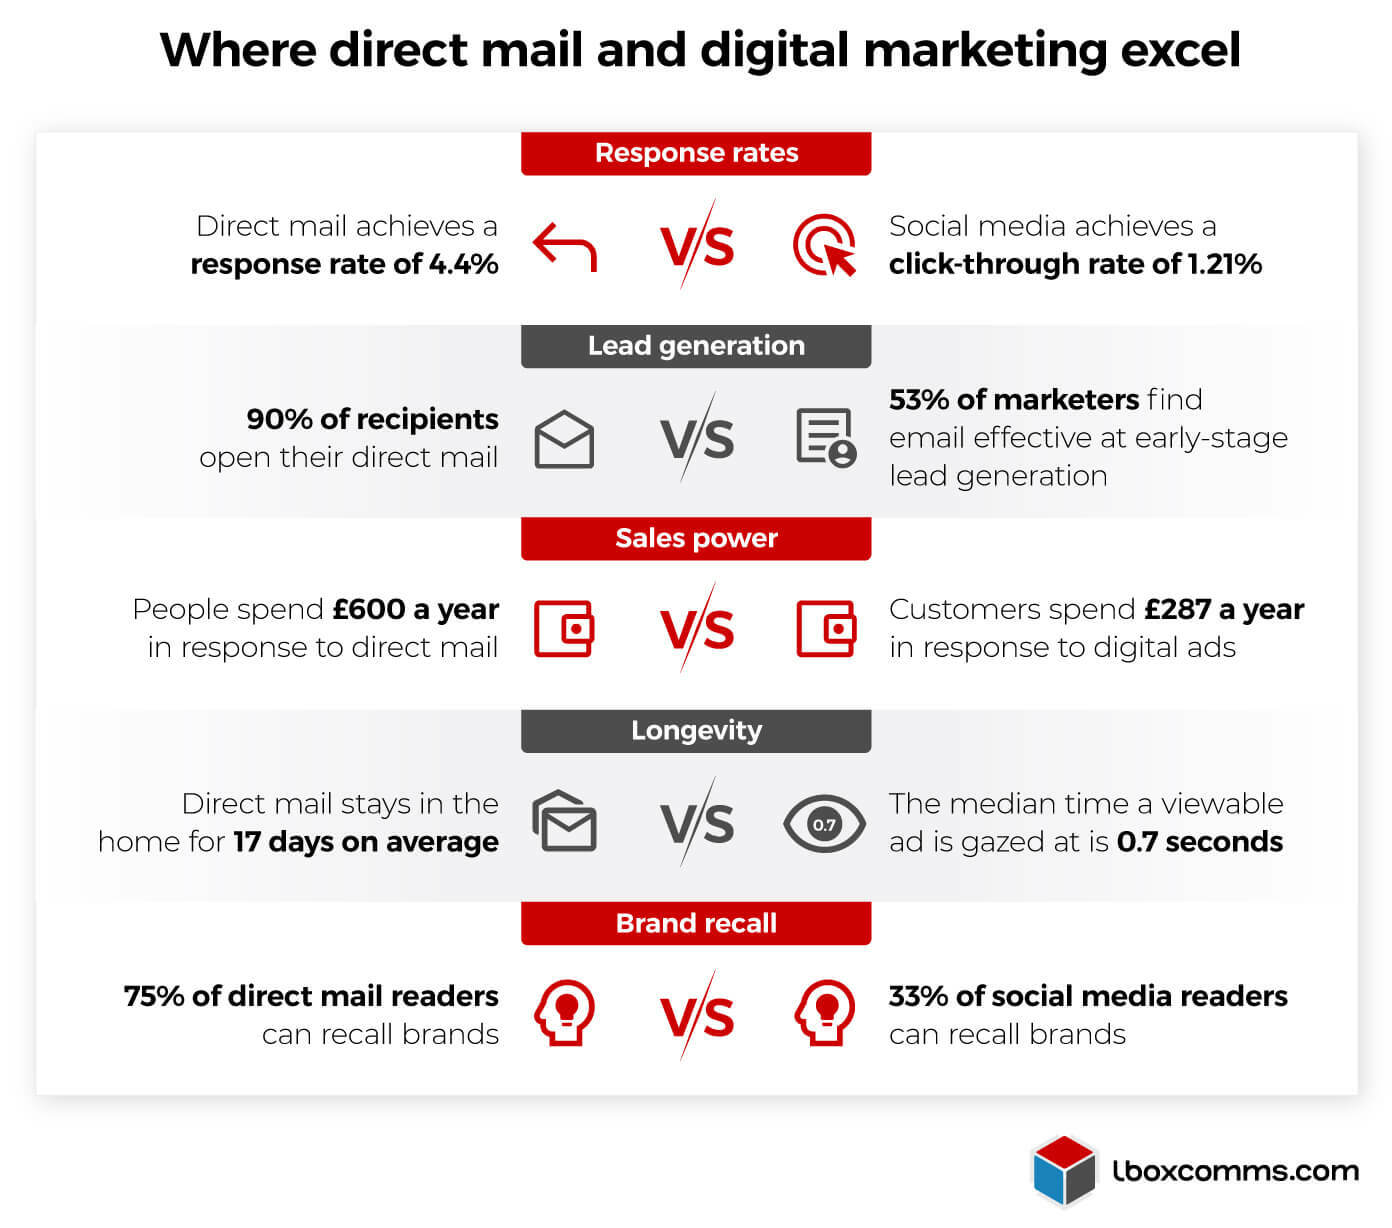 Comparing direct mail success rates with digital marketing values - Infographic